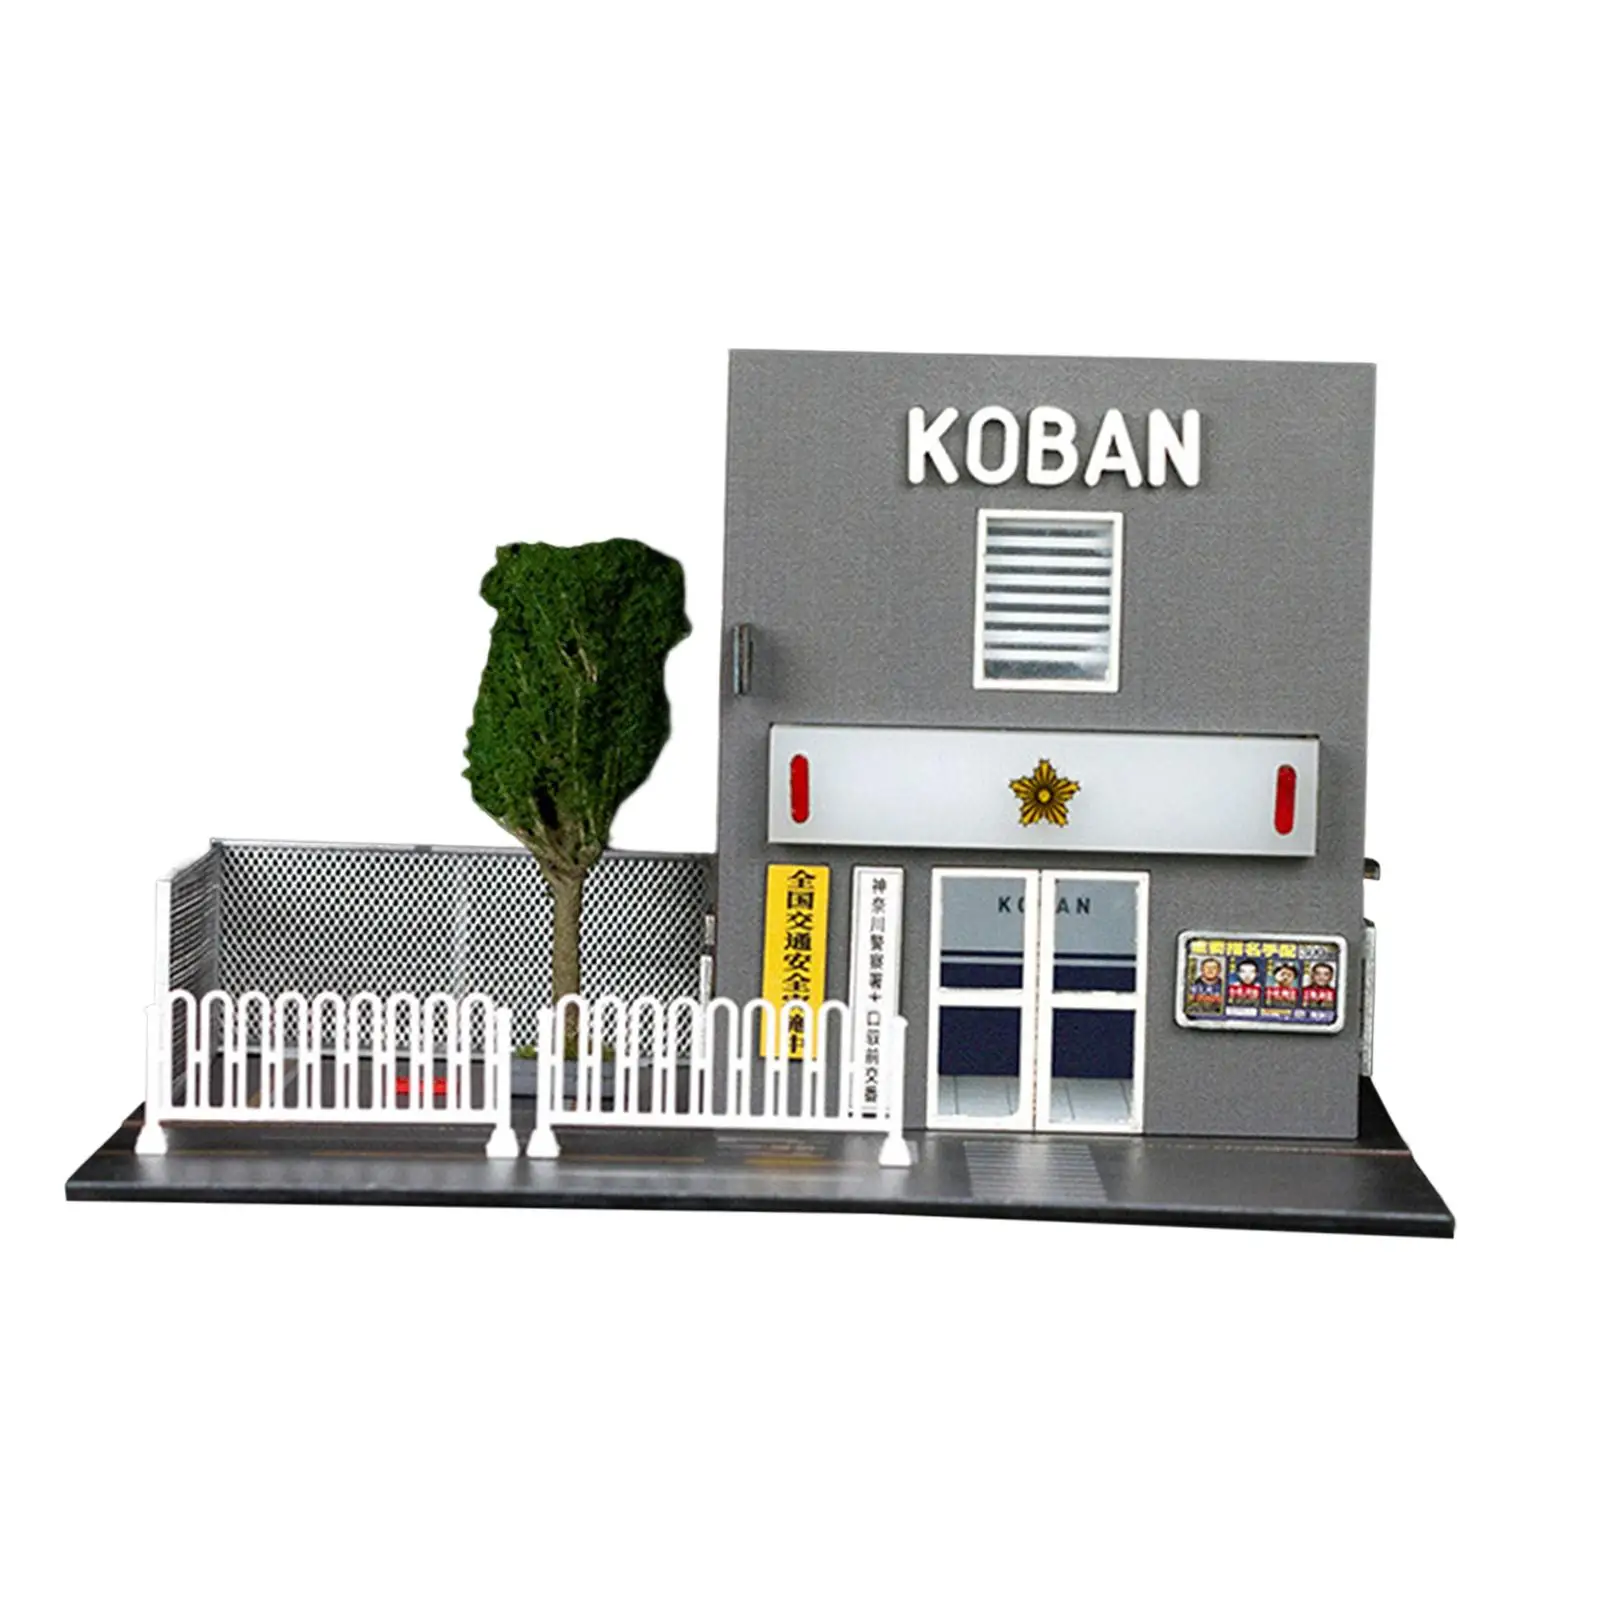 1/64 Koban Model Diorama Kits Miniature Layout for Doll House Accessories Micro Landscape Scene Layout Props Ornament